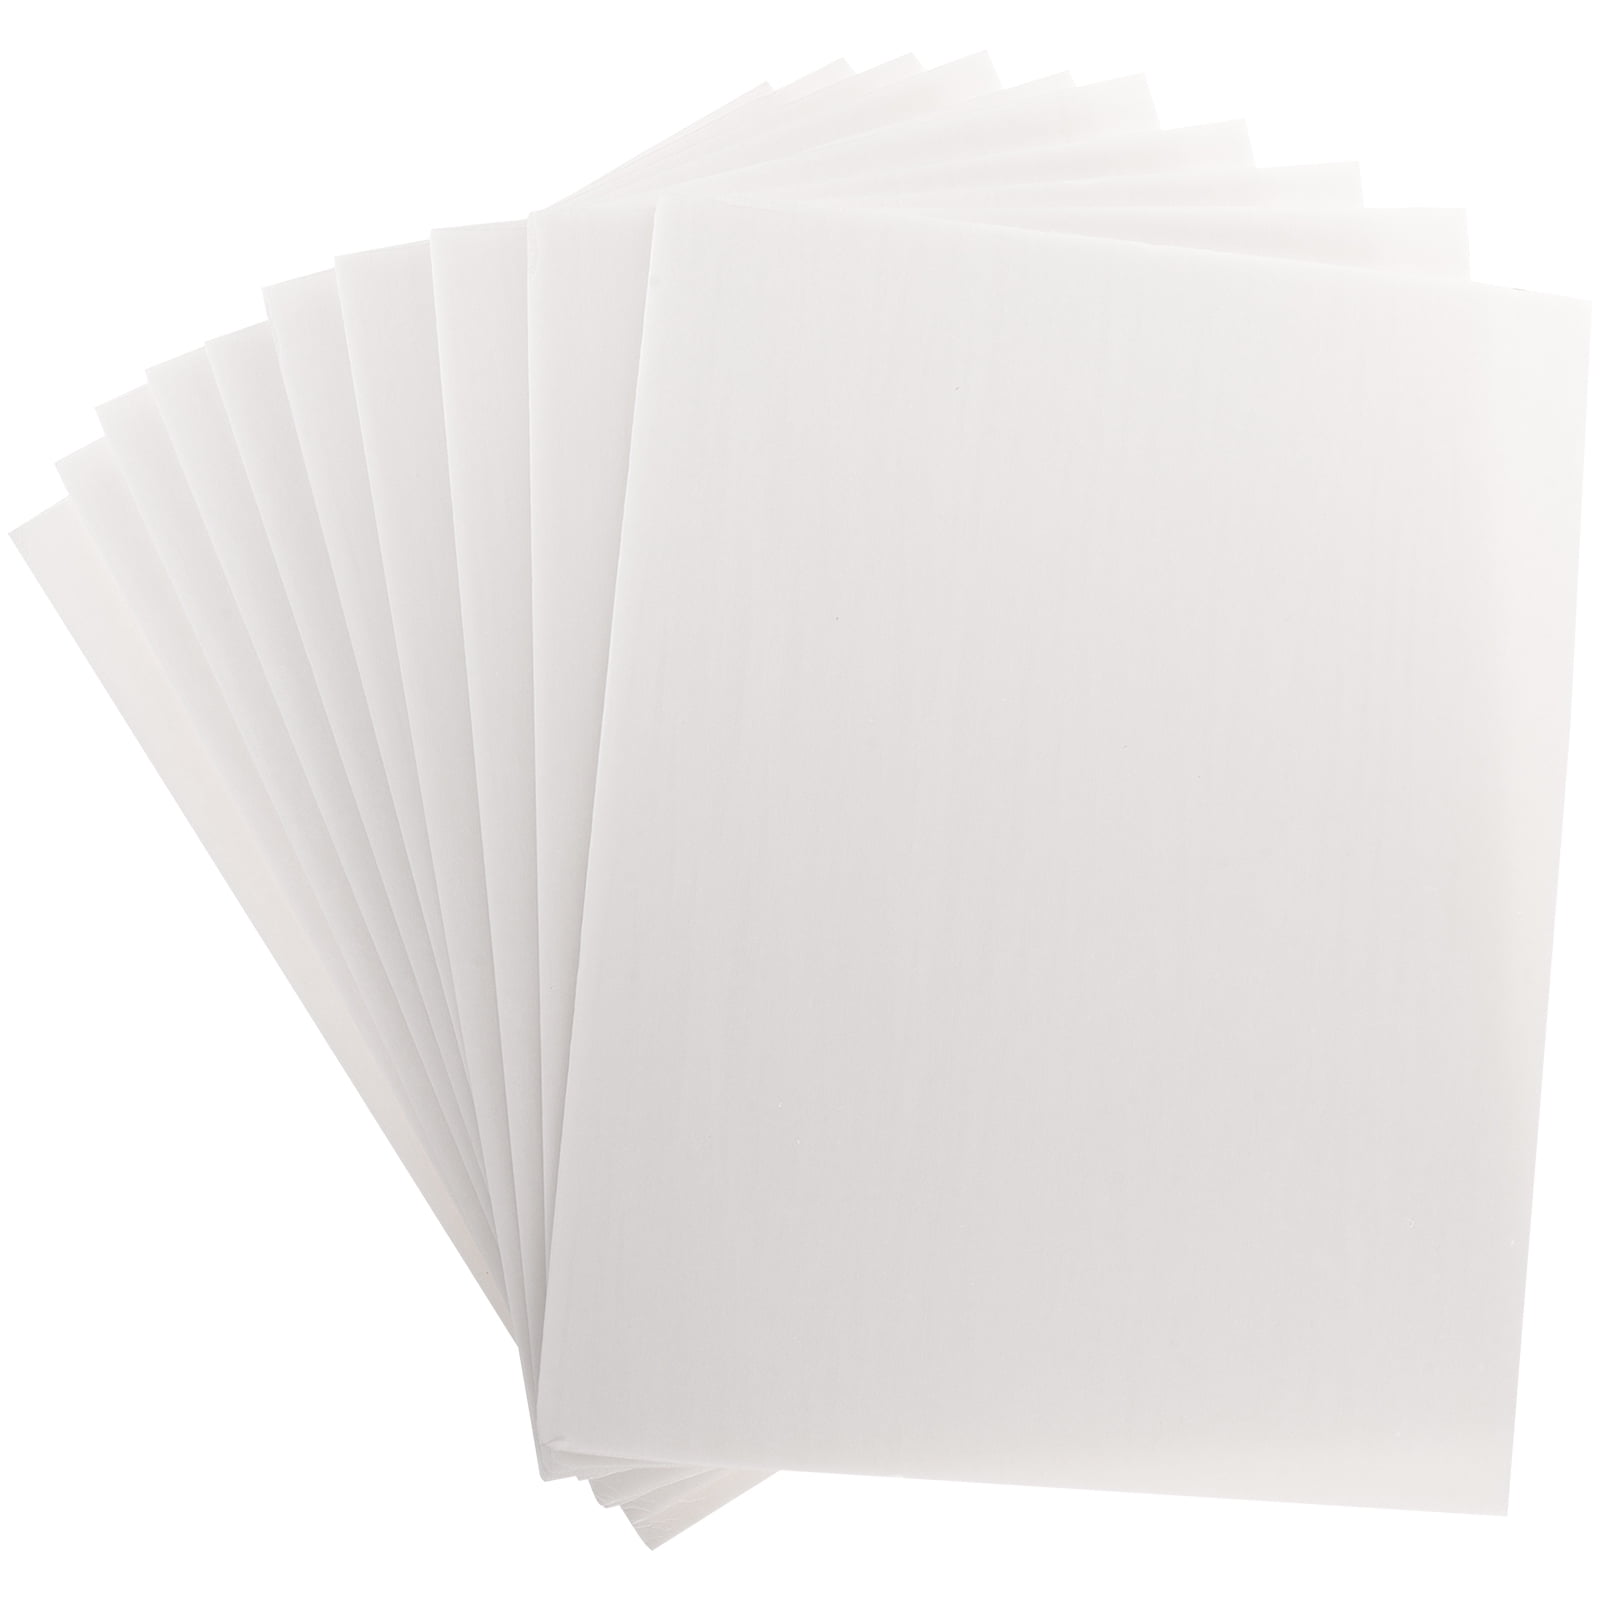 5 Sheets White Foam Boards--Sand Table Building Model Materials 2mm / 3mm Thick Foam PVC Sheet Poster Board Mount Board for Mounting, Crafts